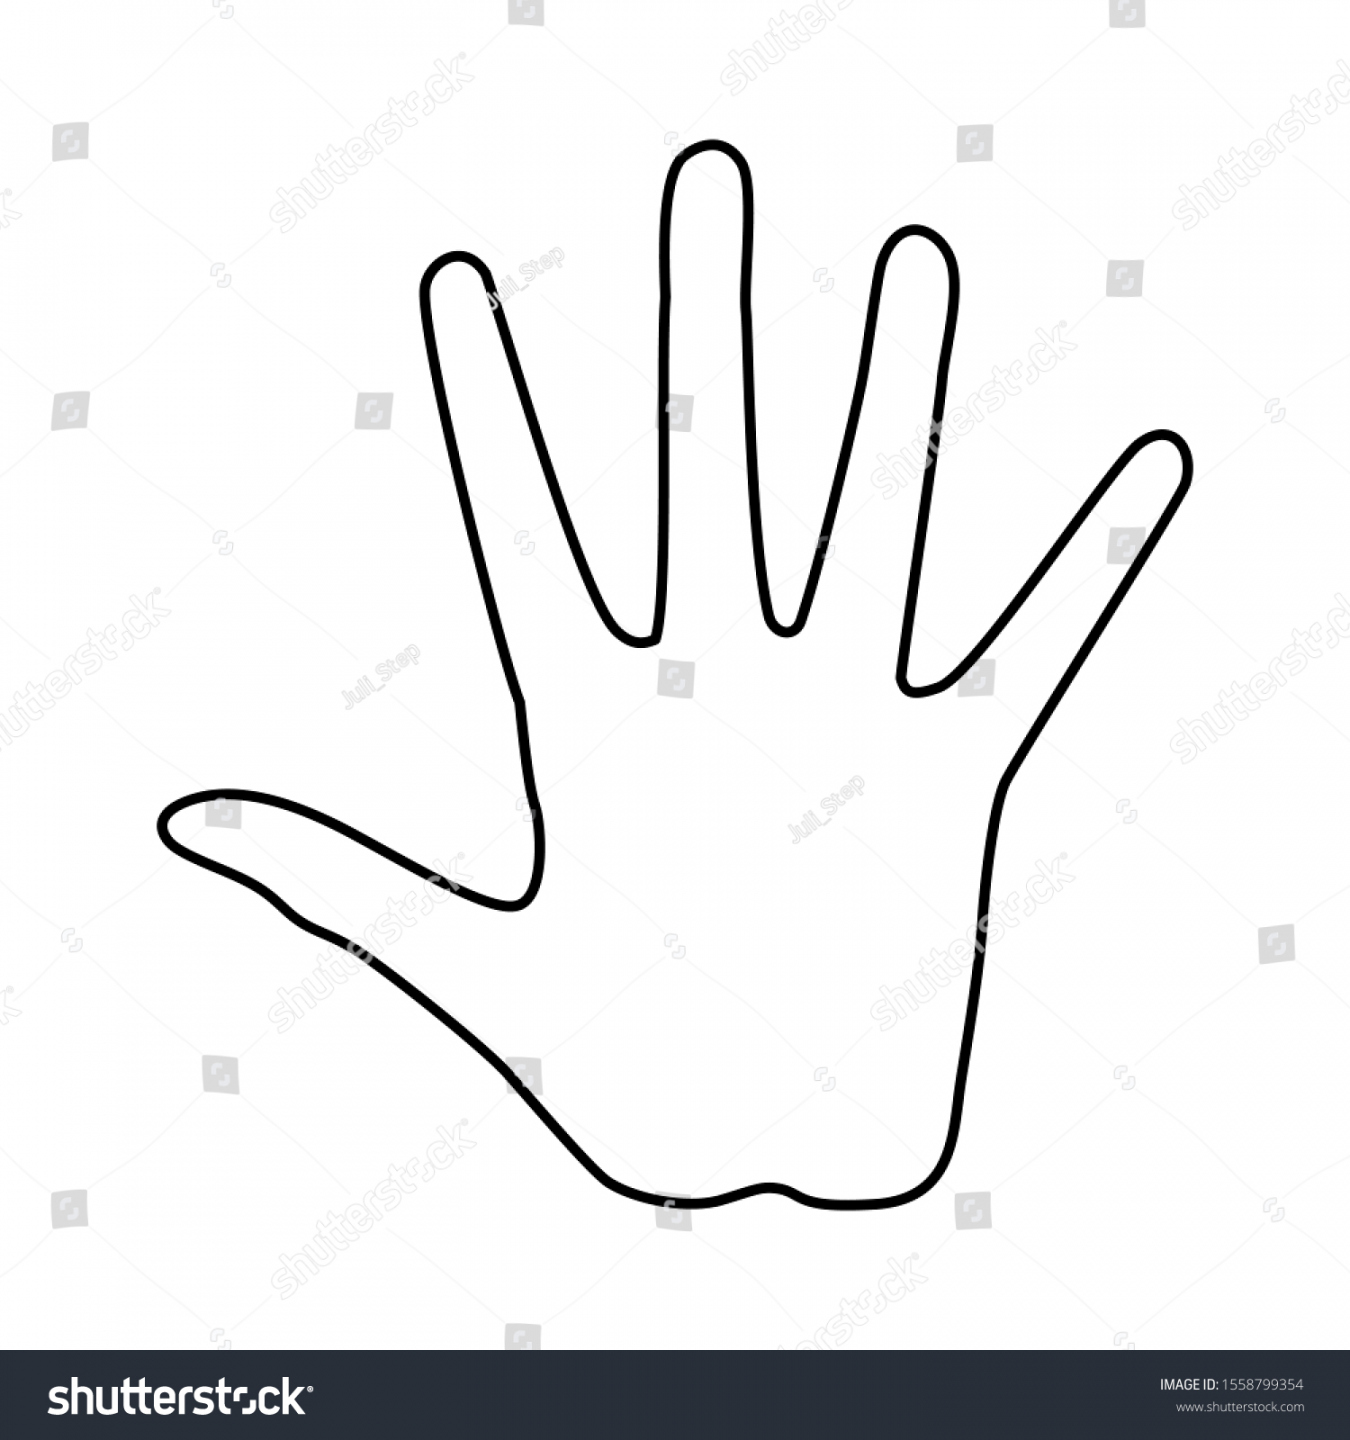 , Hand Trace Images, Stock Photos & Vectors  Shutterstock - FREE Printables - Traced Hand